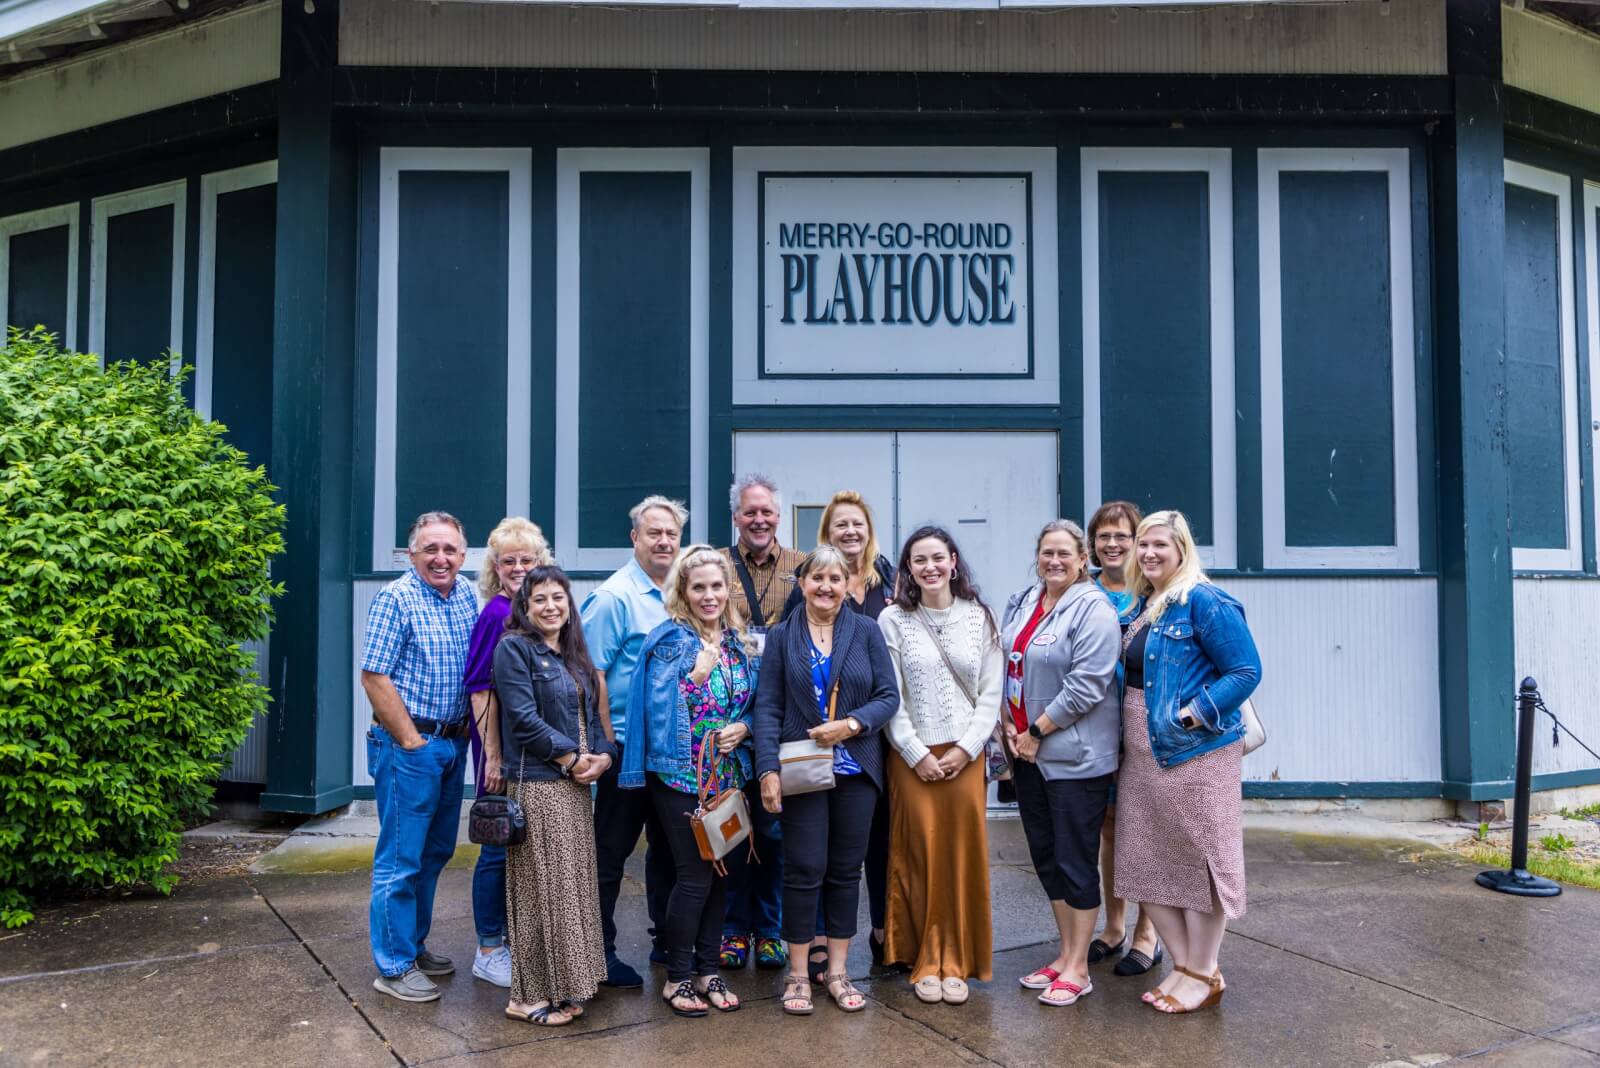 Group gathered in front of the Merry-Go-Round Playhouse that houses the REV Theatre Company.